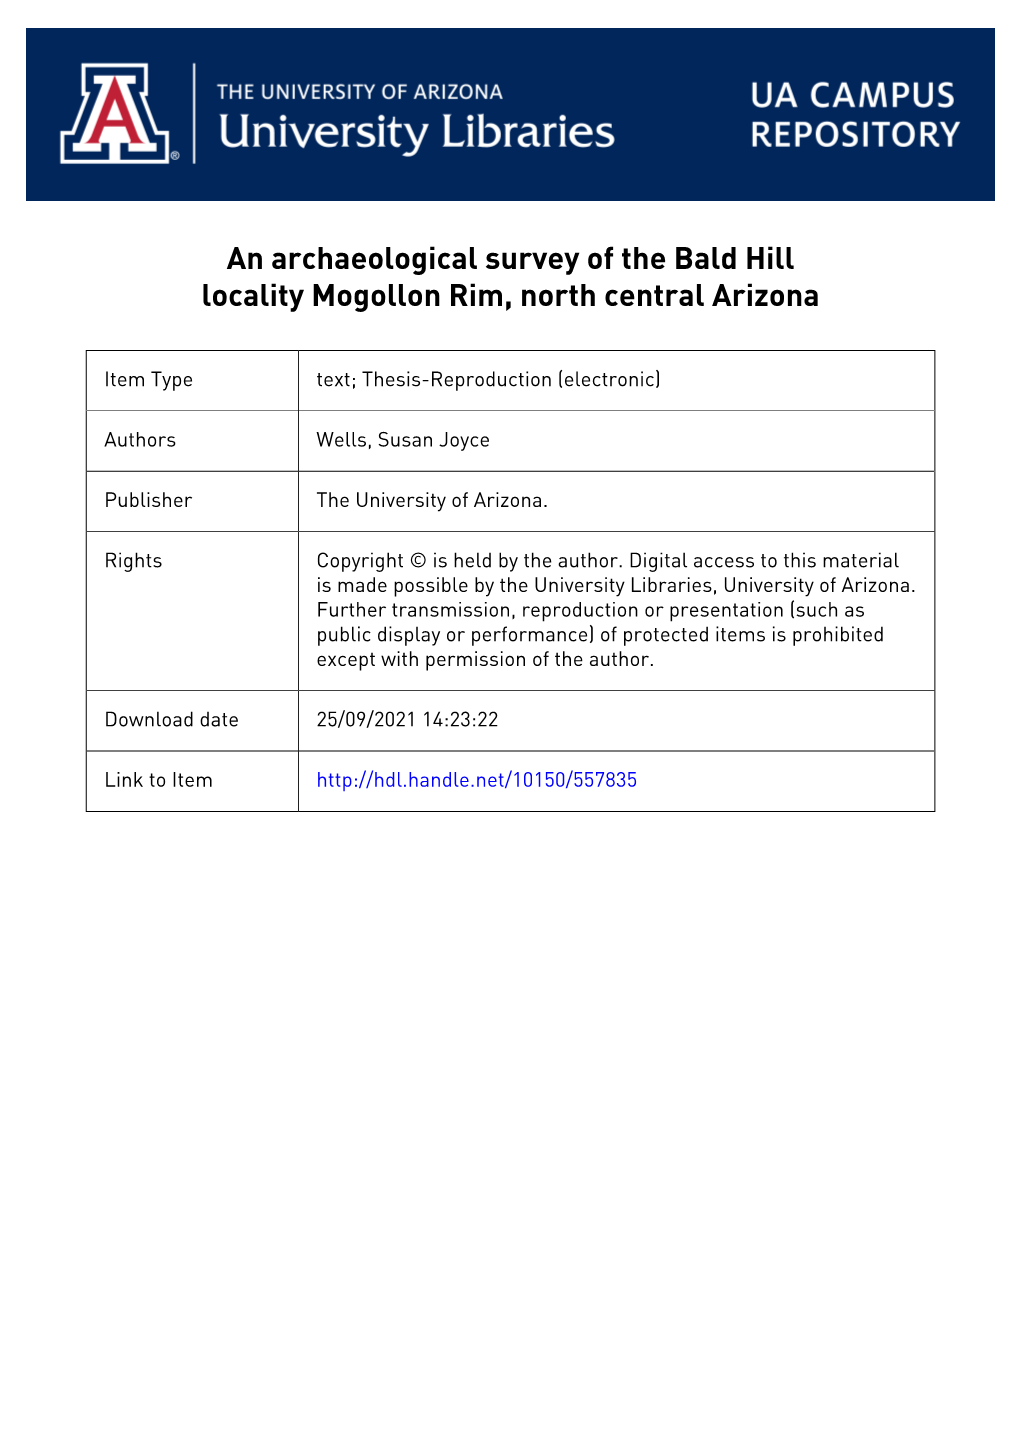 An Archaeological Survey of the Bald Hill Locality Mogollon Rim, North Central Arizona